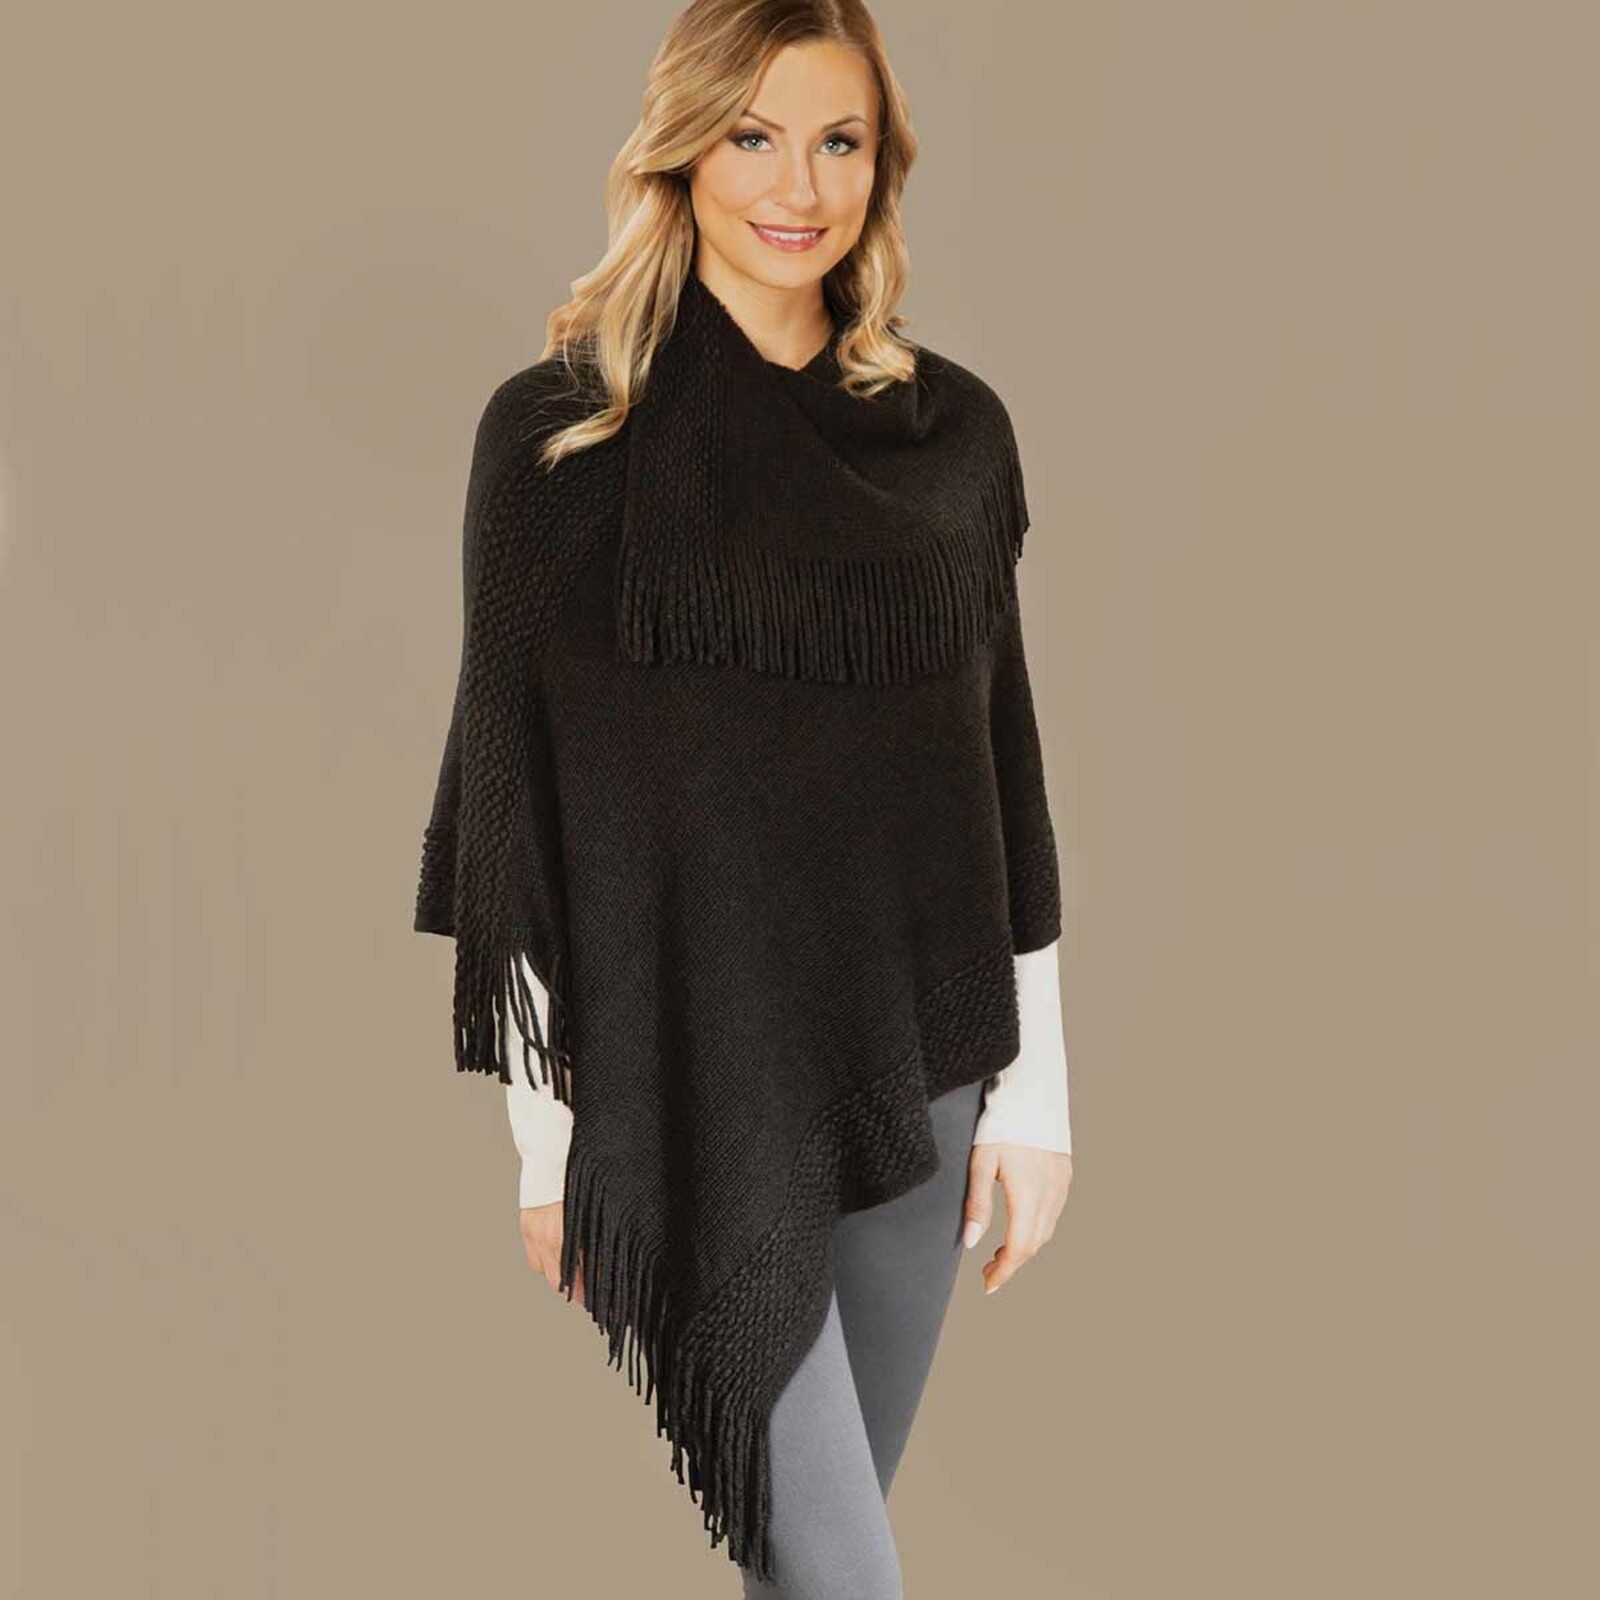 Trezo Black Knit Poncho with Collar and Fringe    S5976 loading=